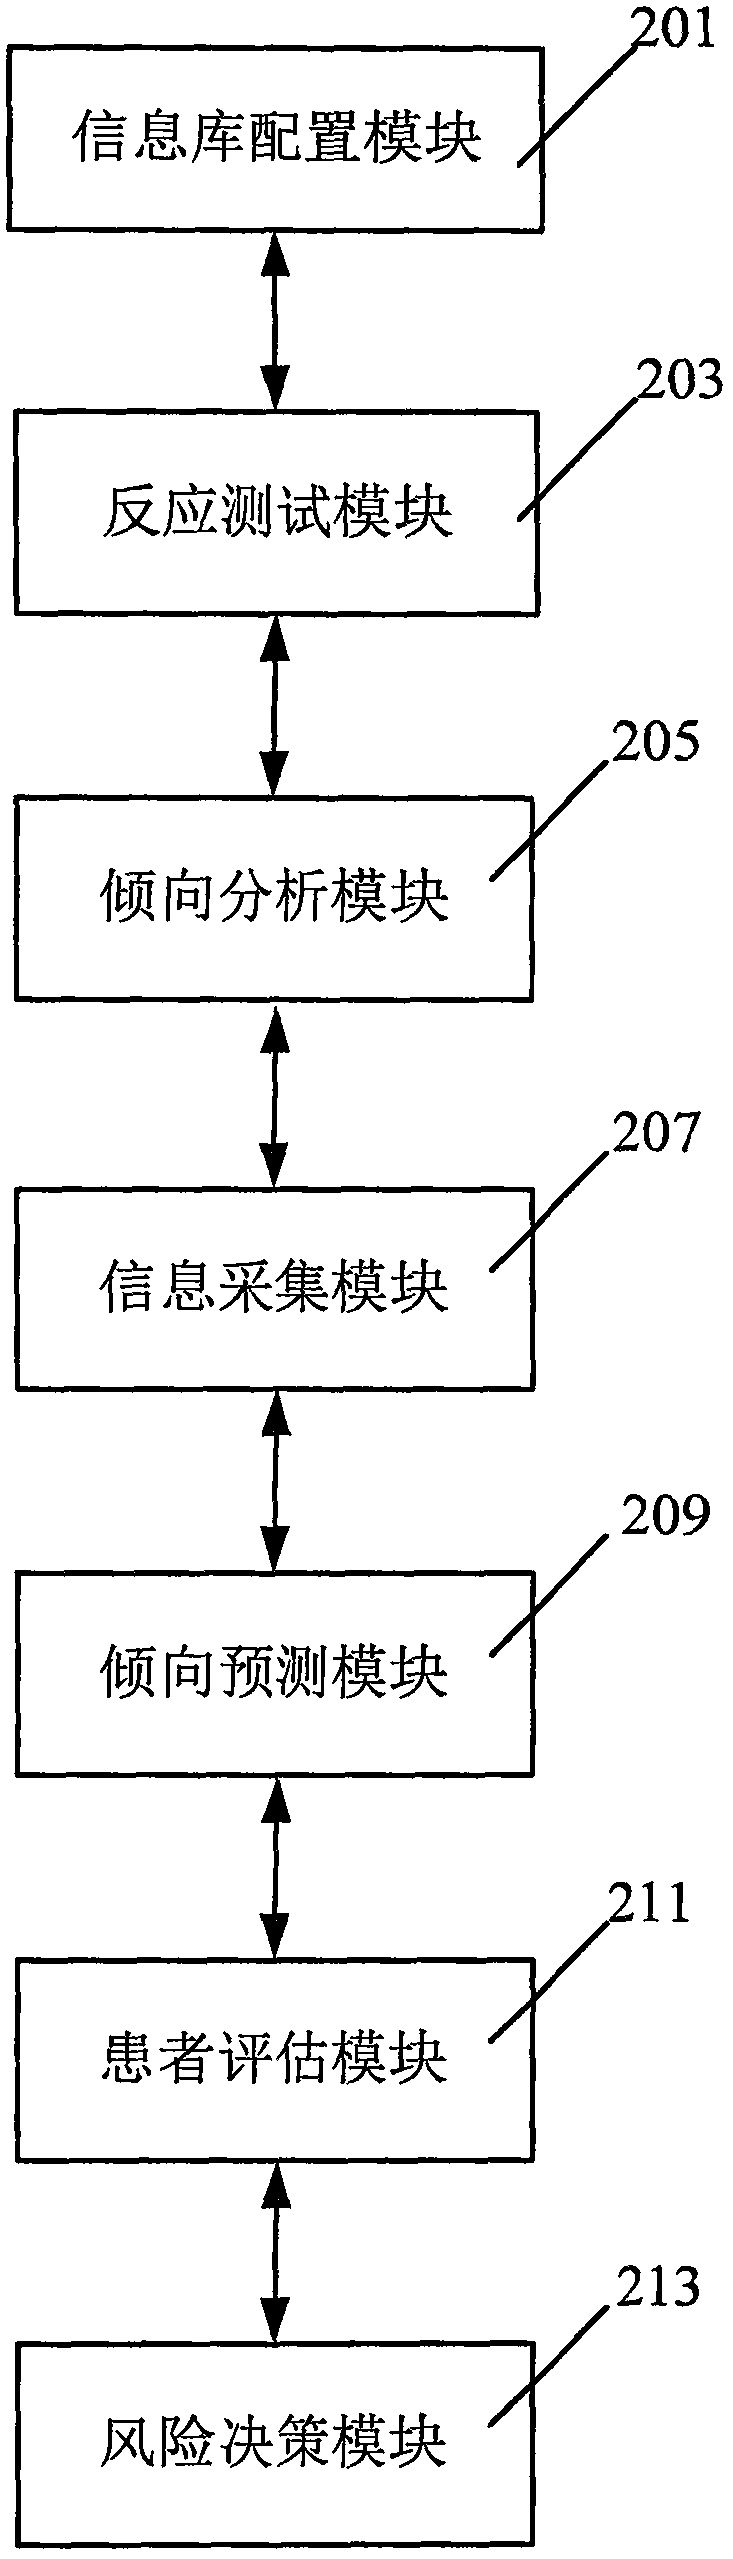 A medical decision support method and system